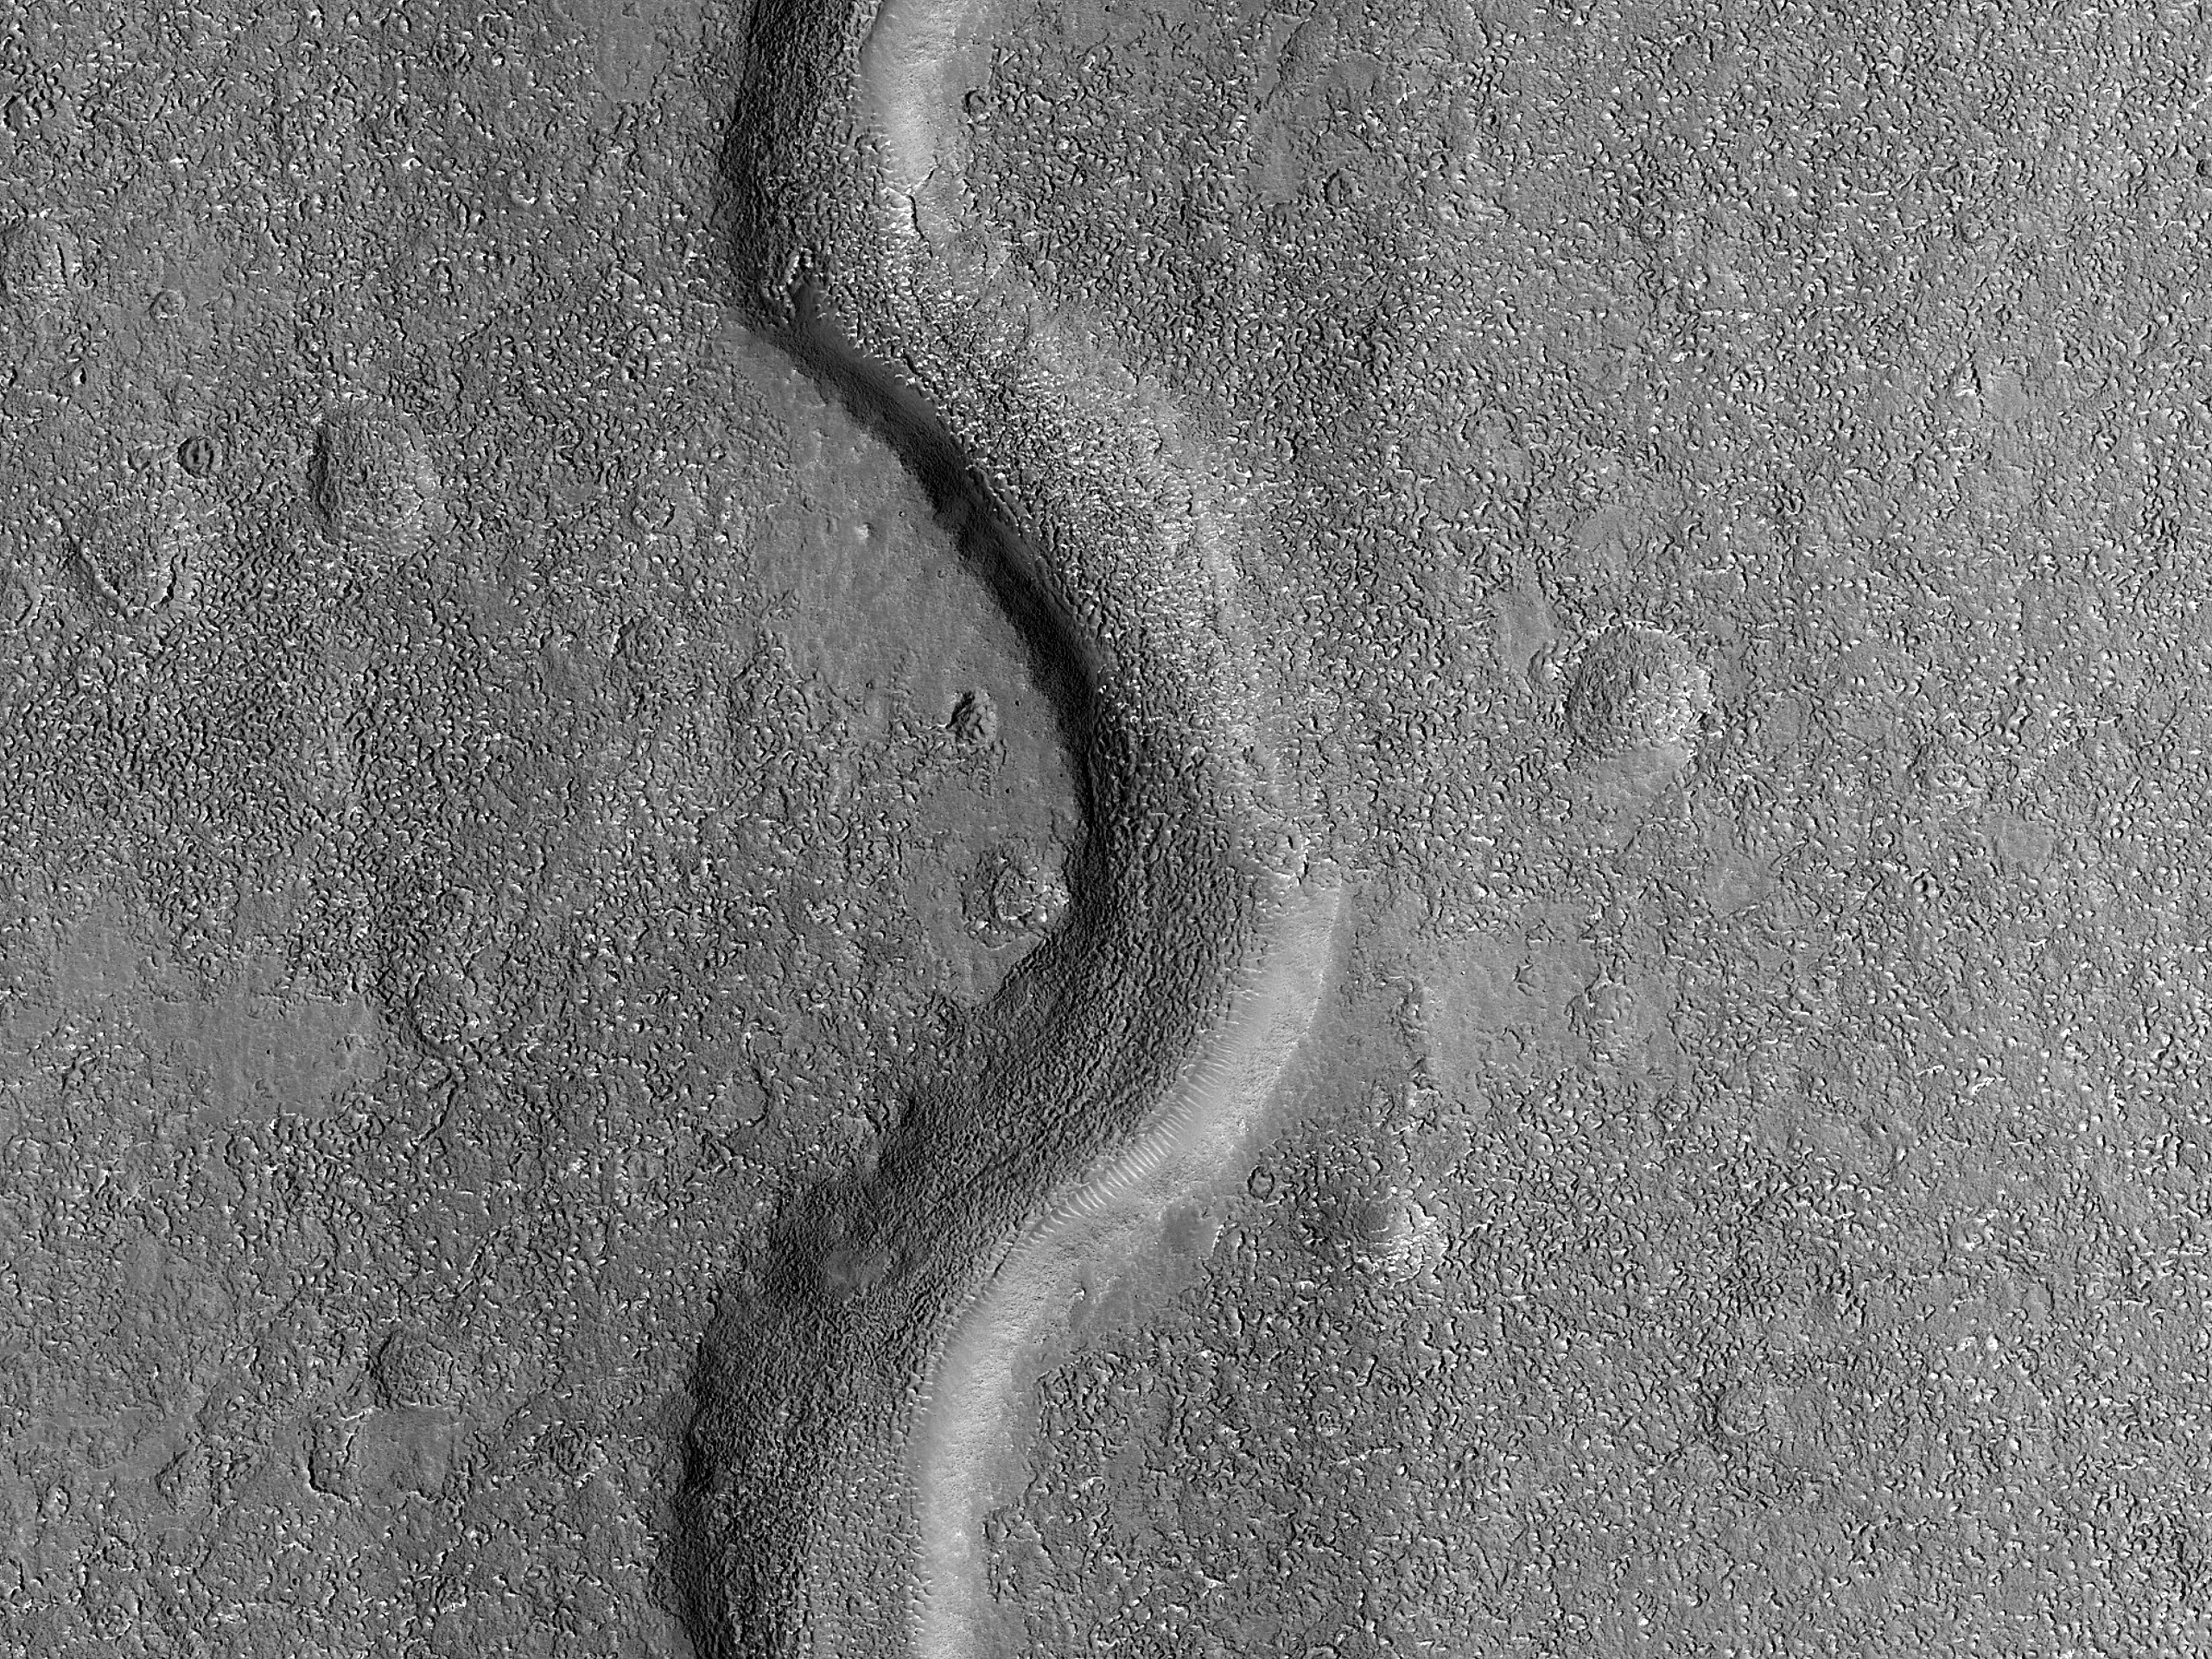 Streamlined in Coracis Fossae